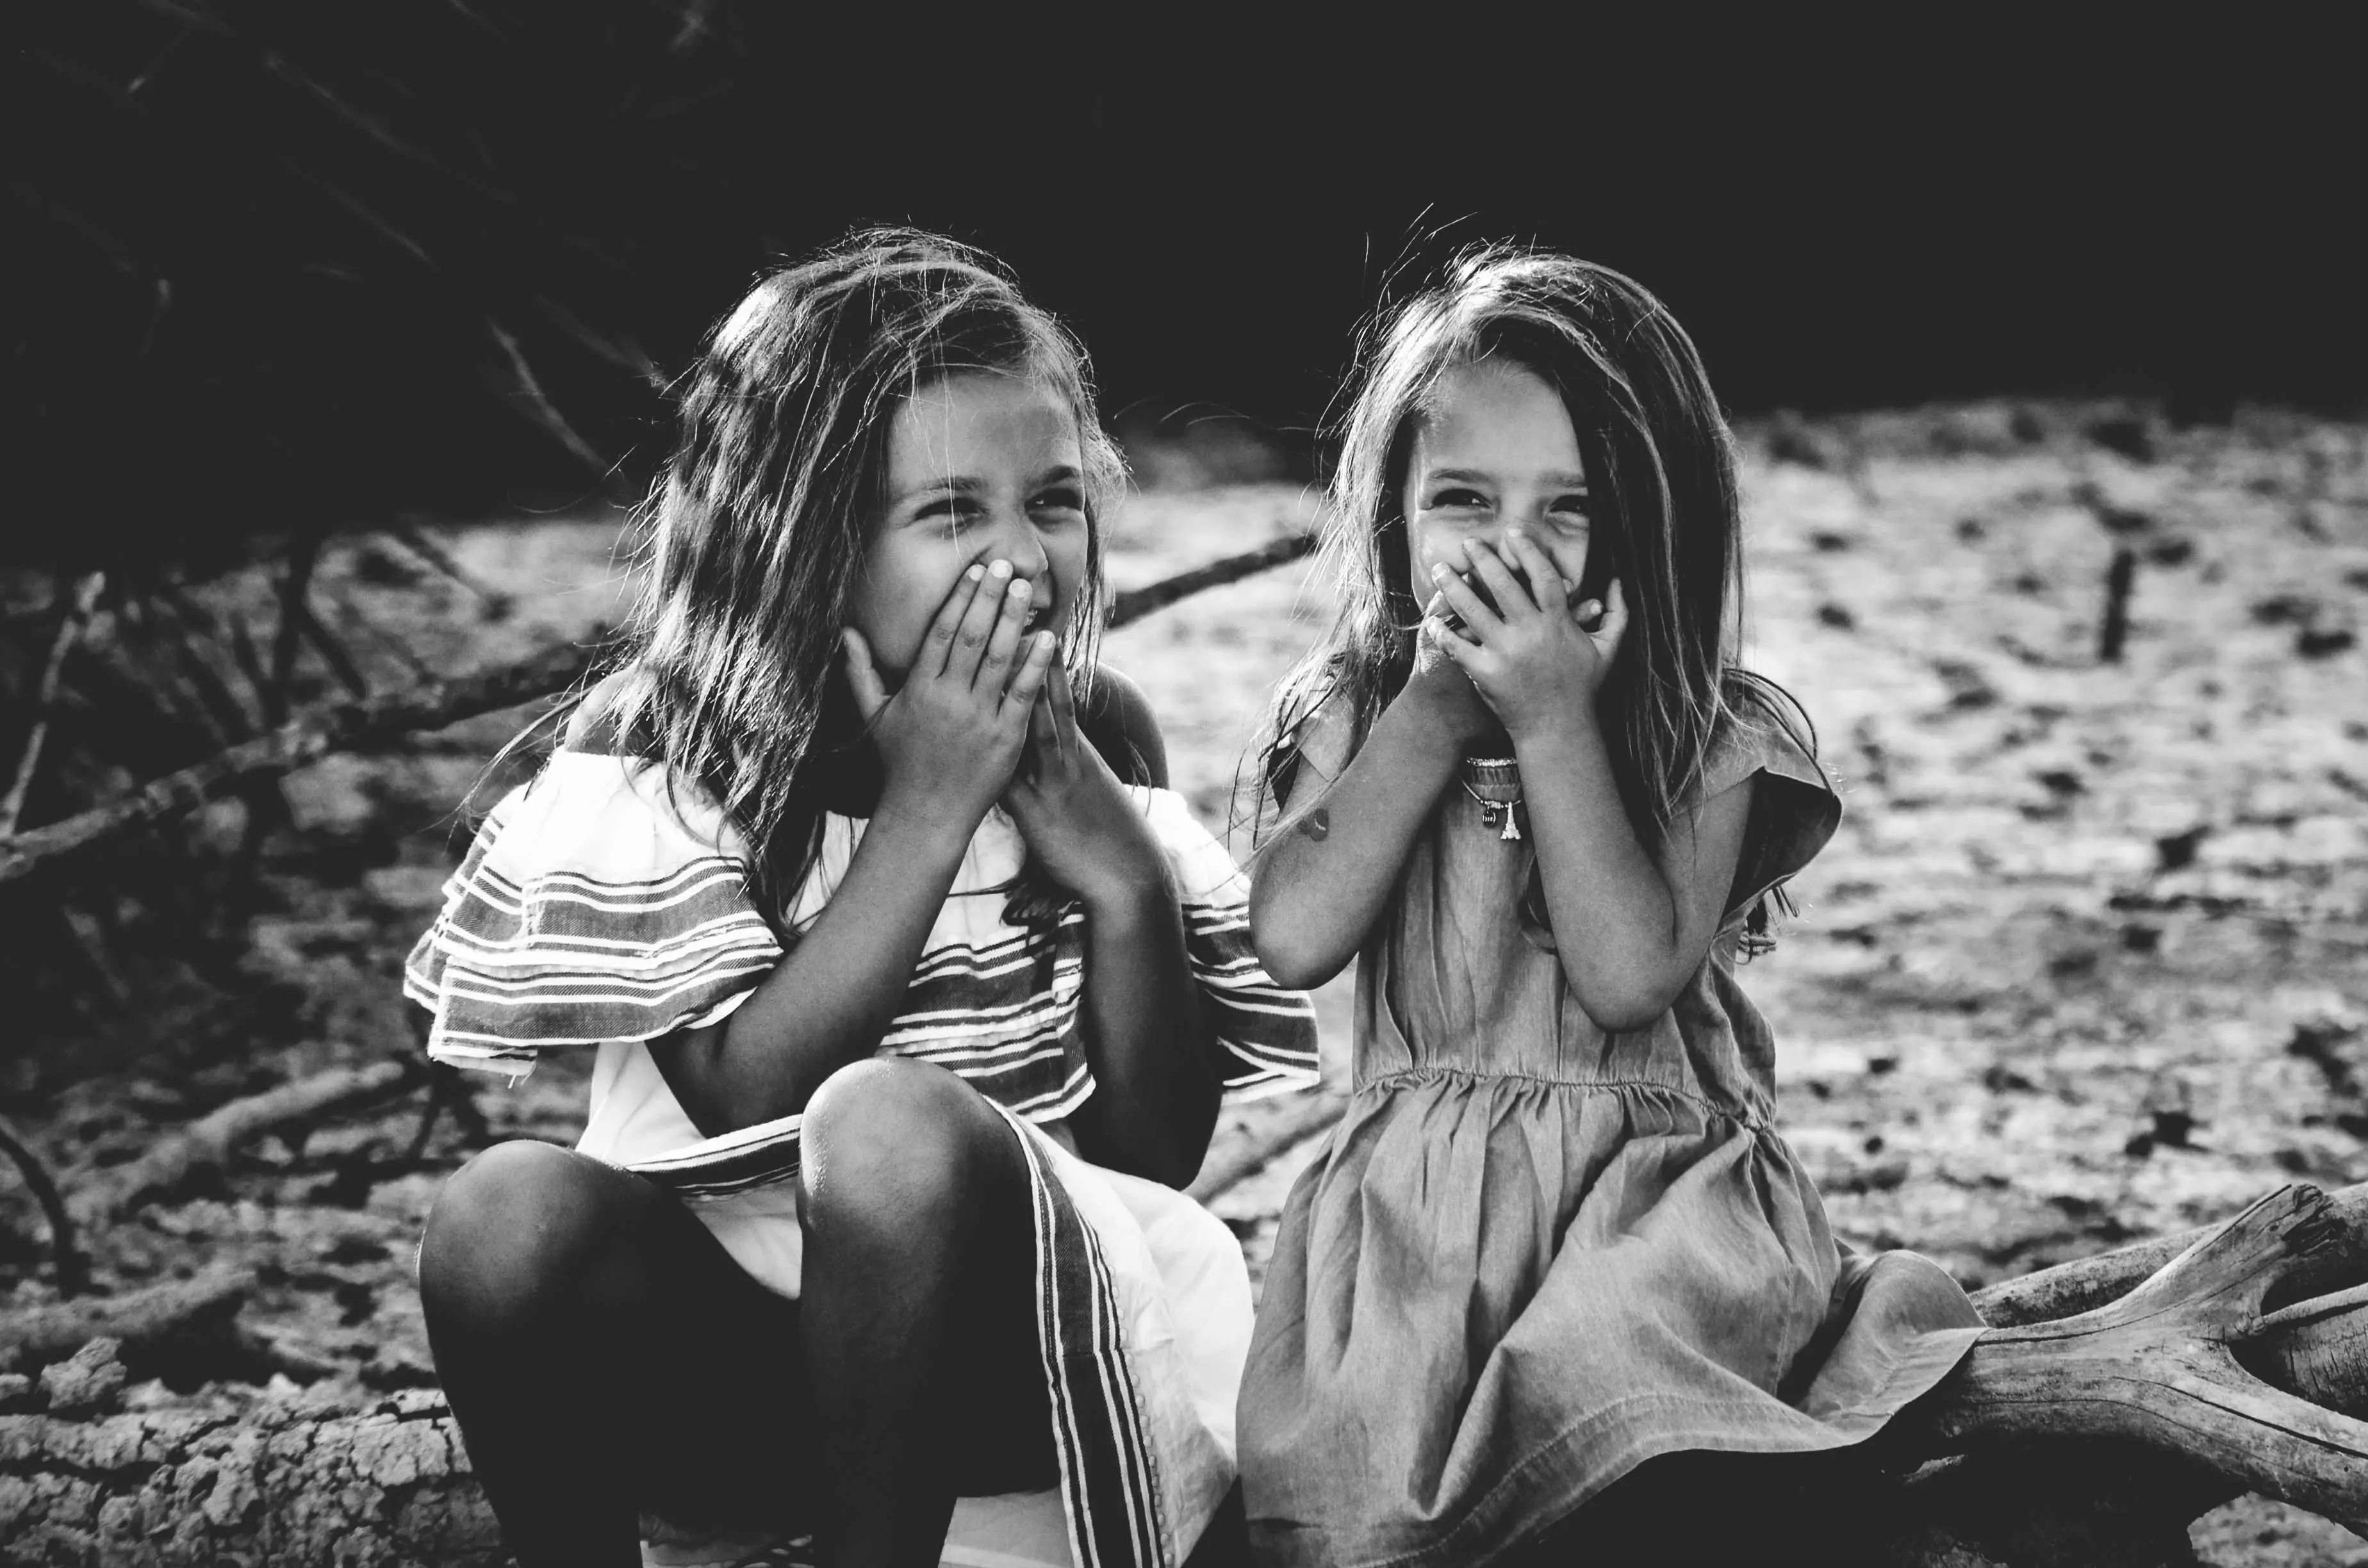 Two giggling kids as good friends